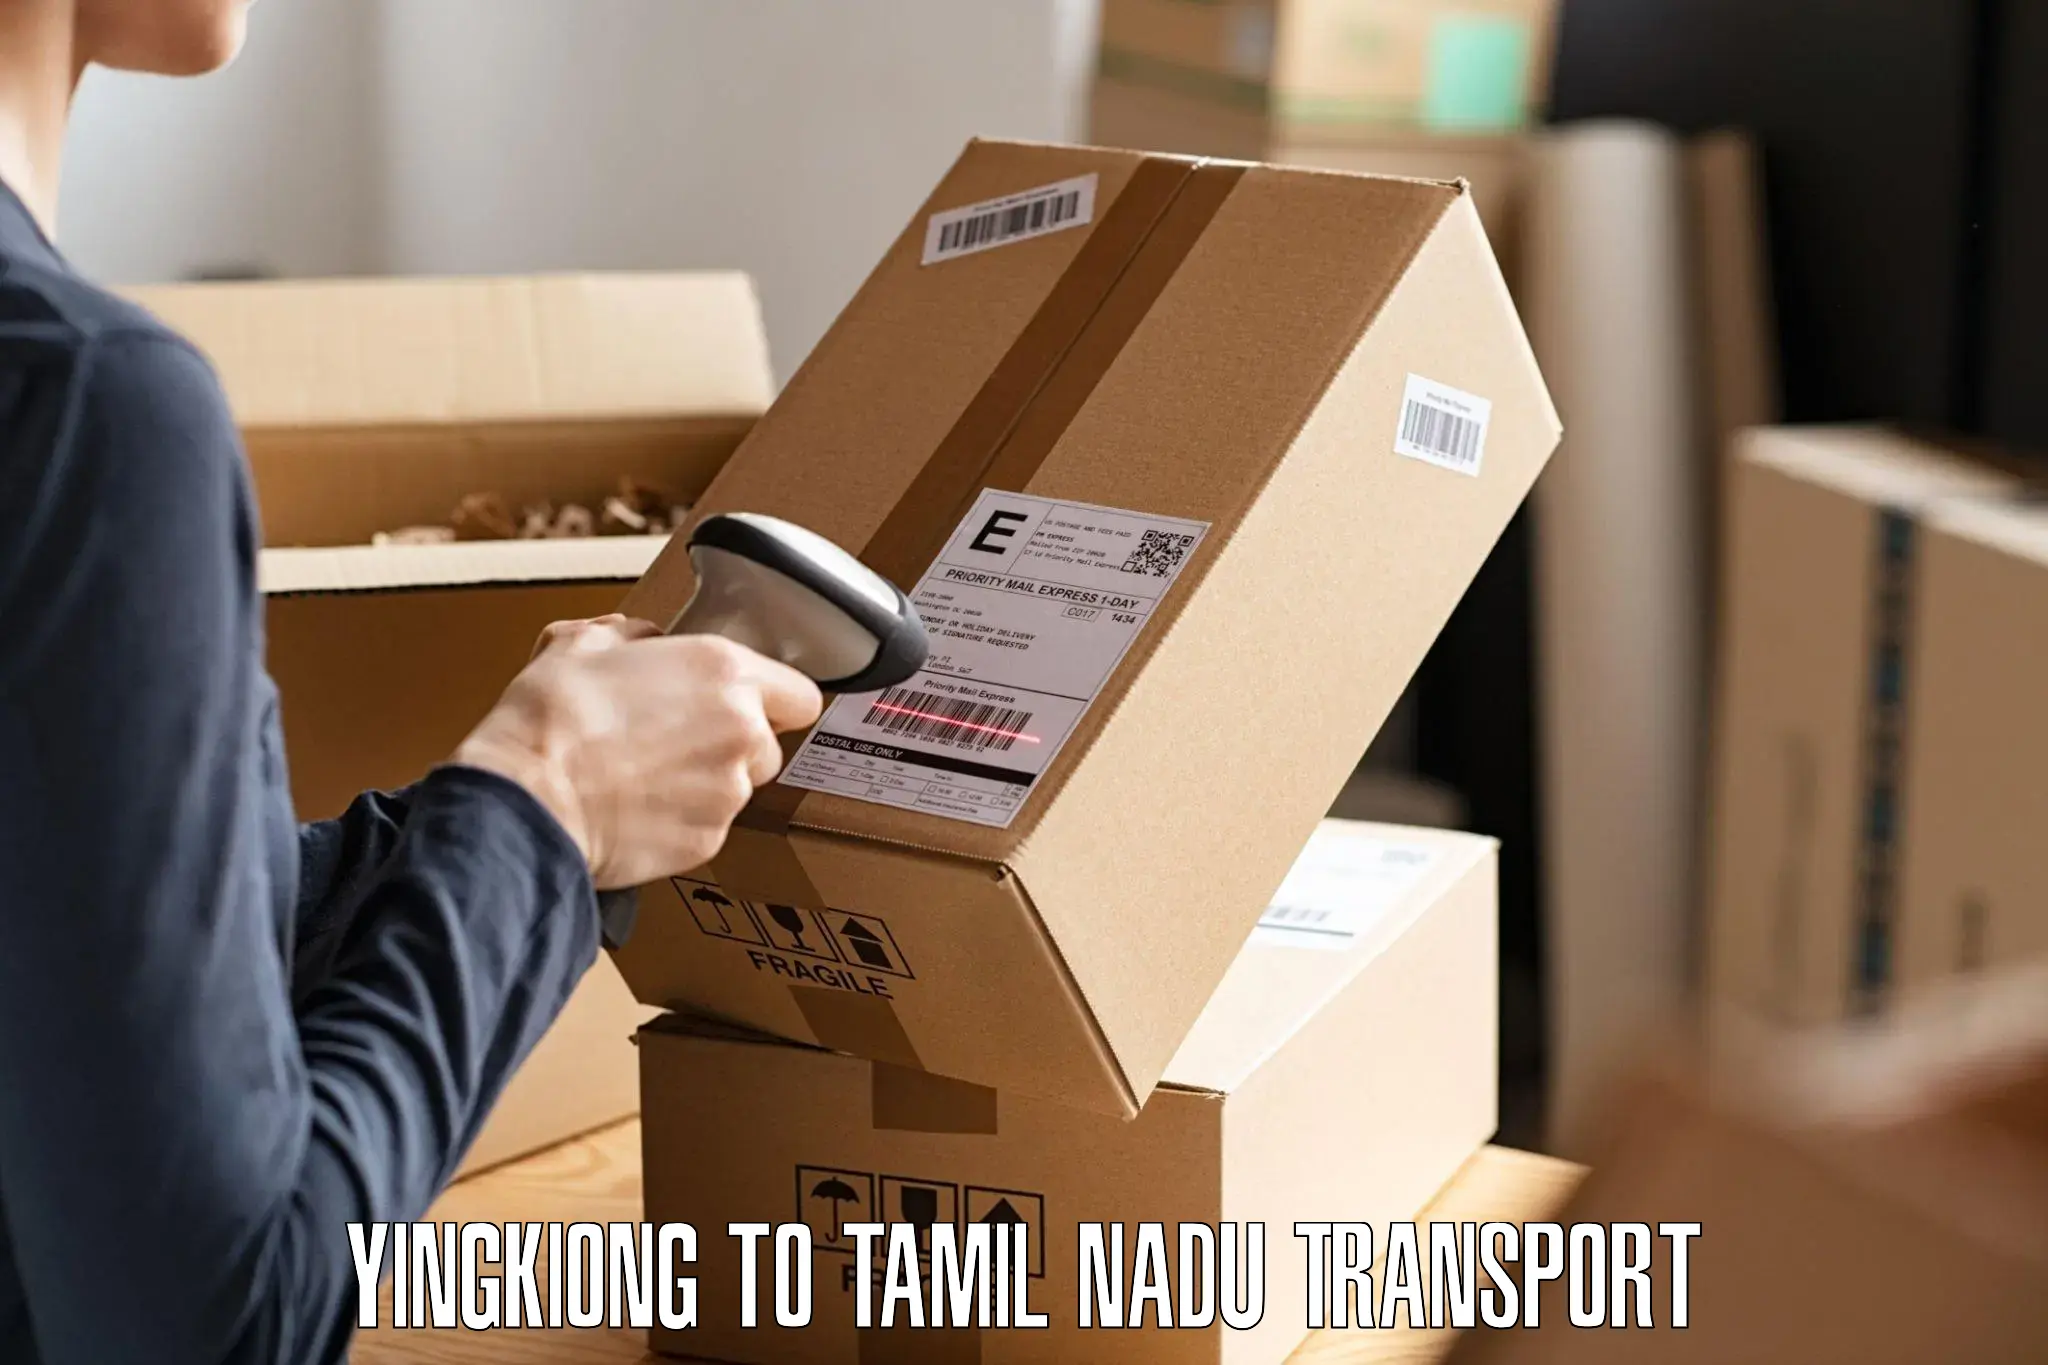 Container transportation services Yingkiong to Tirunelveli